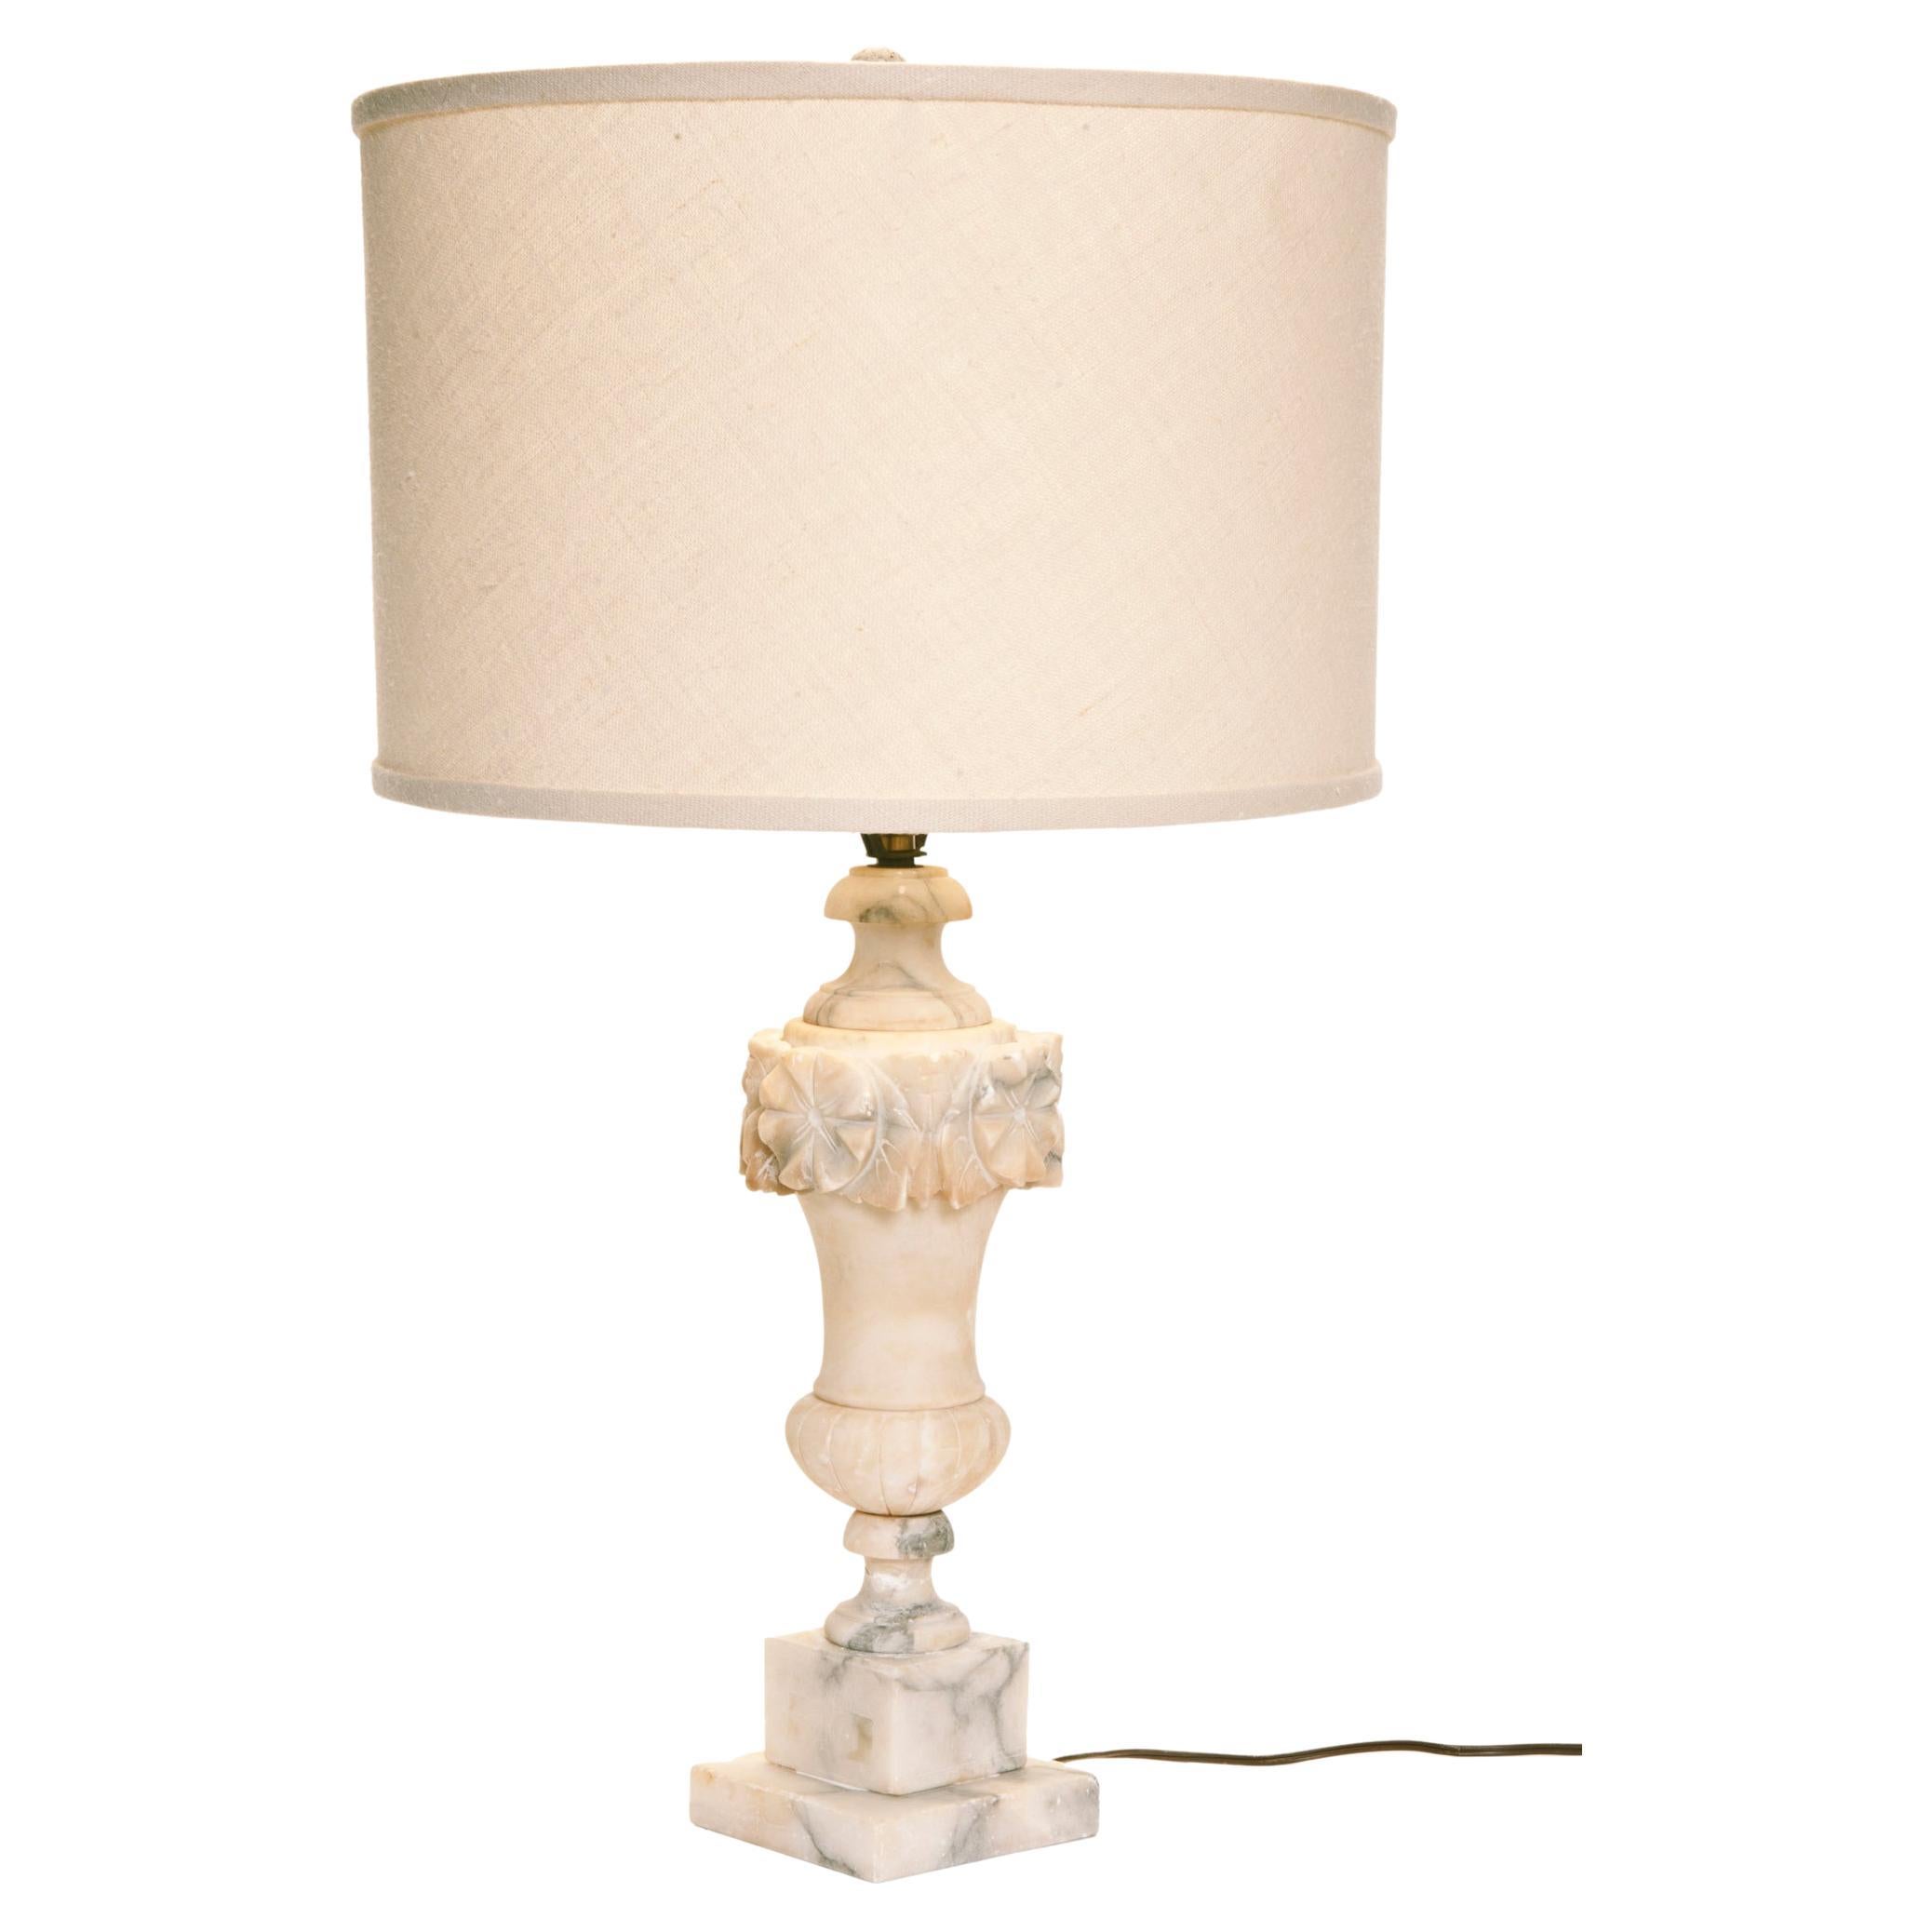  Early 20th Century hand-carved Italian alabaster table lamp from the
The baluster form lamp is topped with an urn embellished with a wreath of carved flowers. 
A linen drum shade is included. Rewired with new cord & socket.